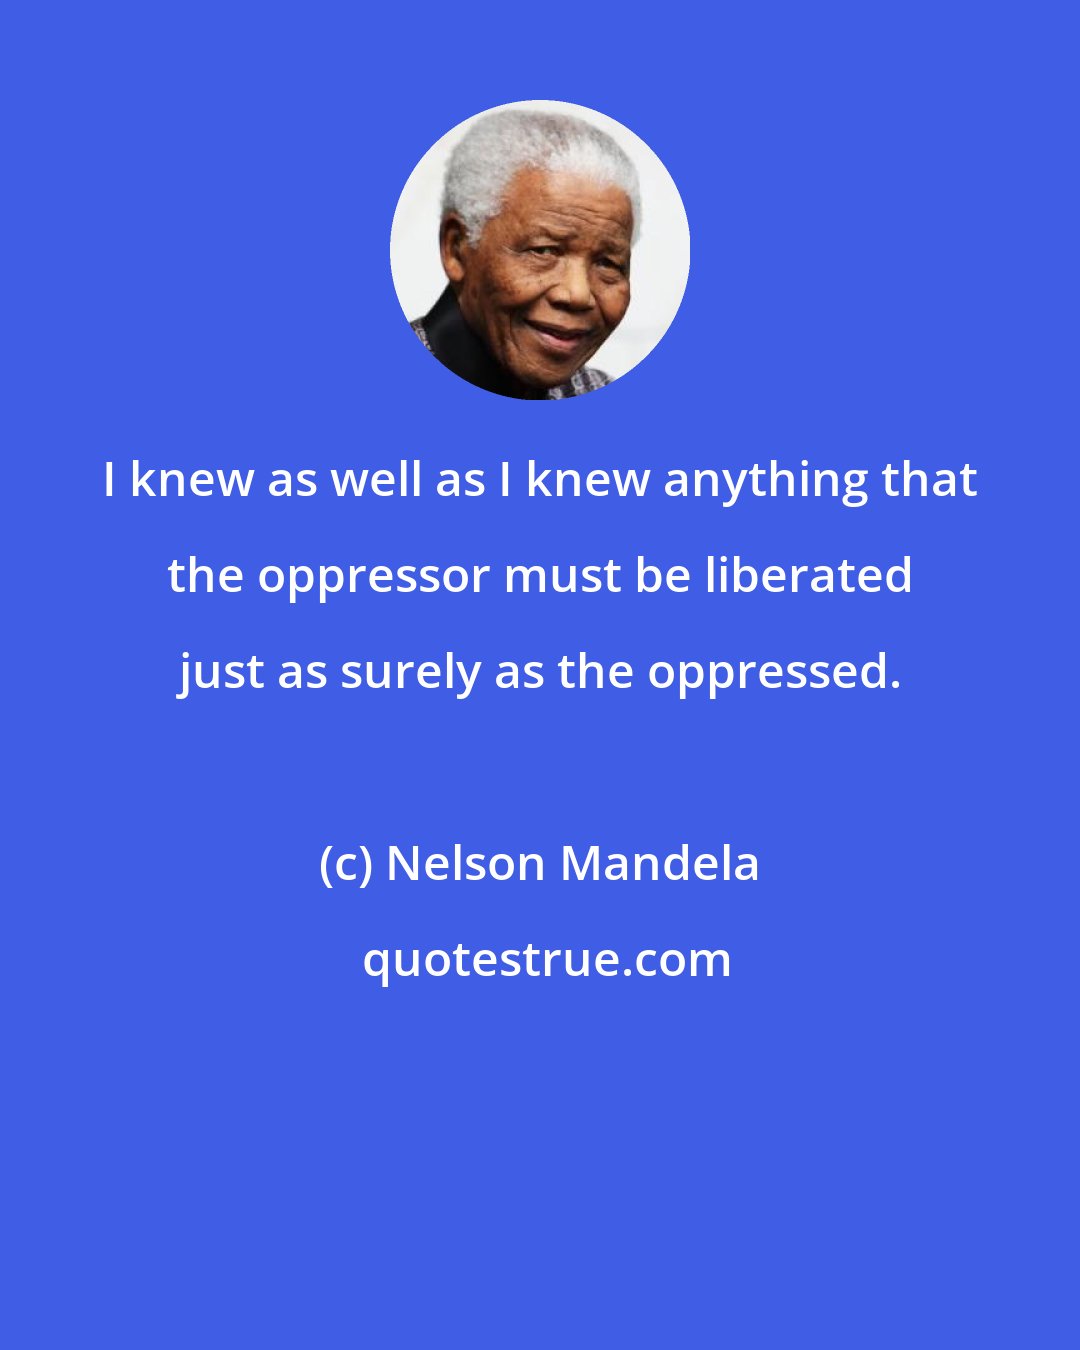 Nelson Mandela: I knew as well as I knew anything that the oppressor must be liberated just as surely as the oppressed.